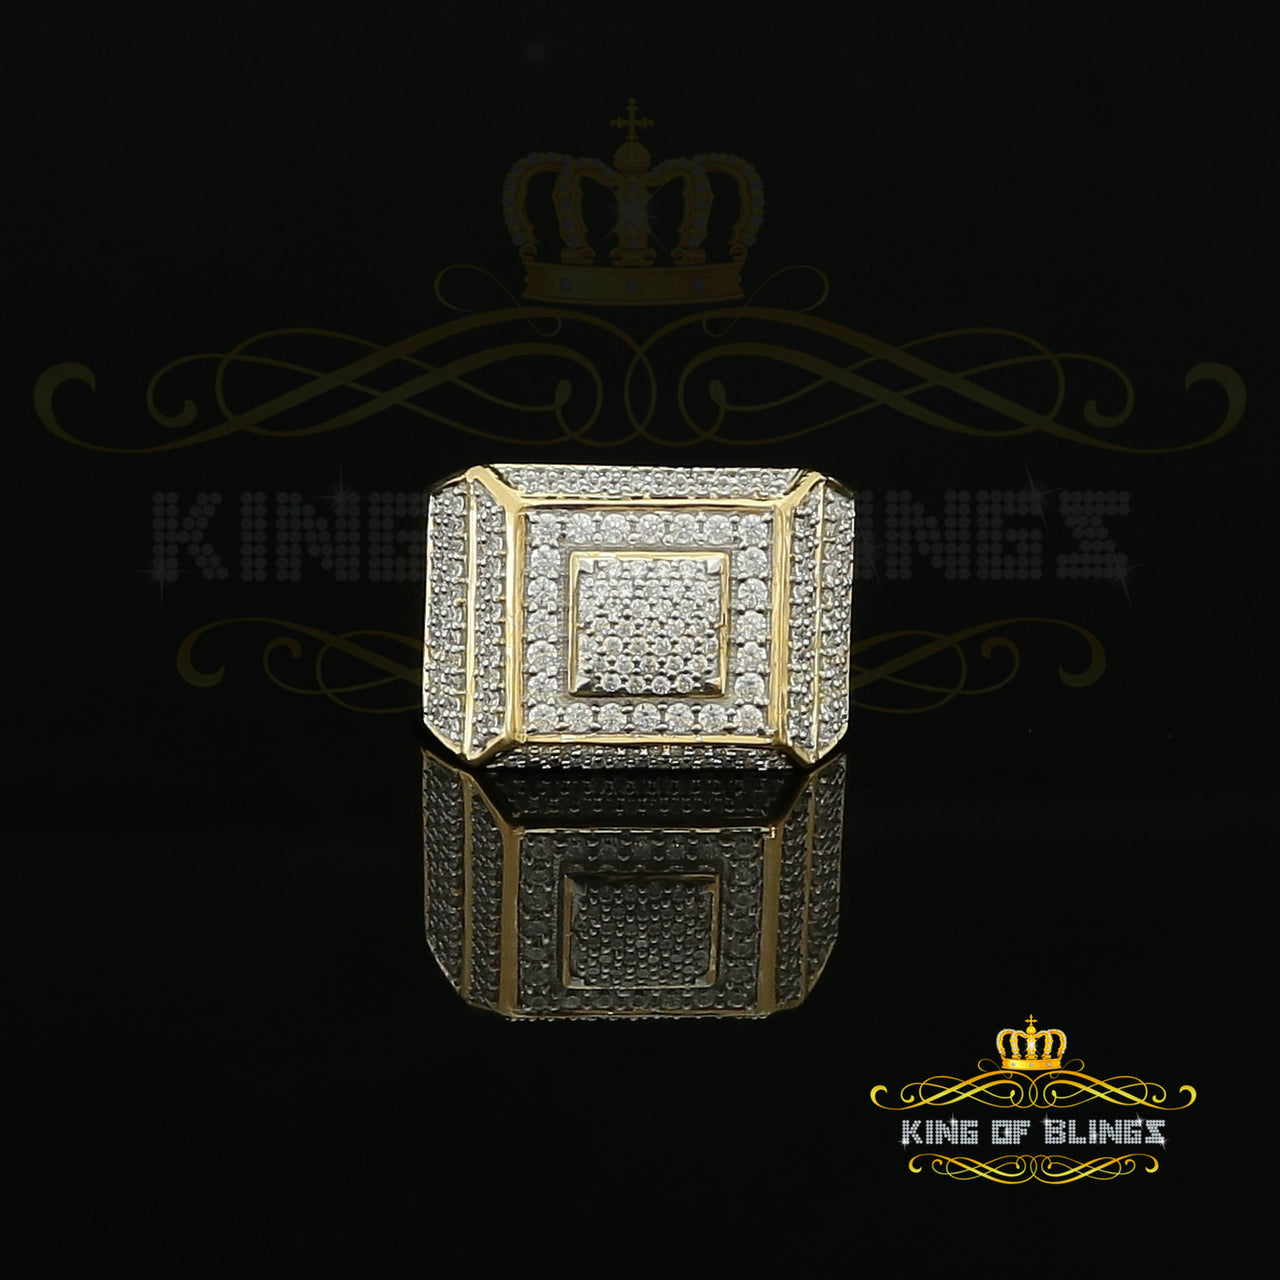 King Of Bling's Sterling Yellow 3.50ct Cubic Zirconia Square Men Adjustable Ring From SZ 9 to 11 KING OF BLINGS